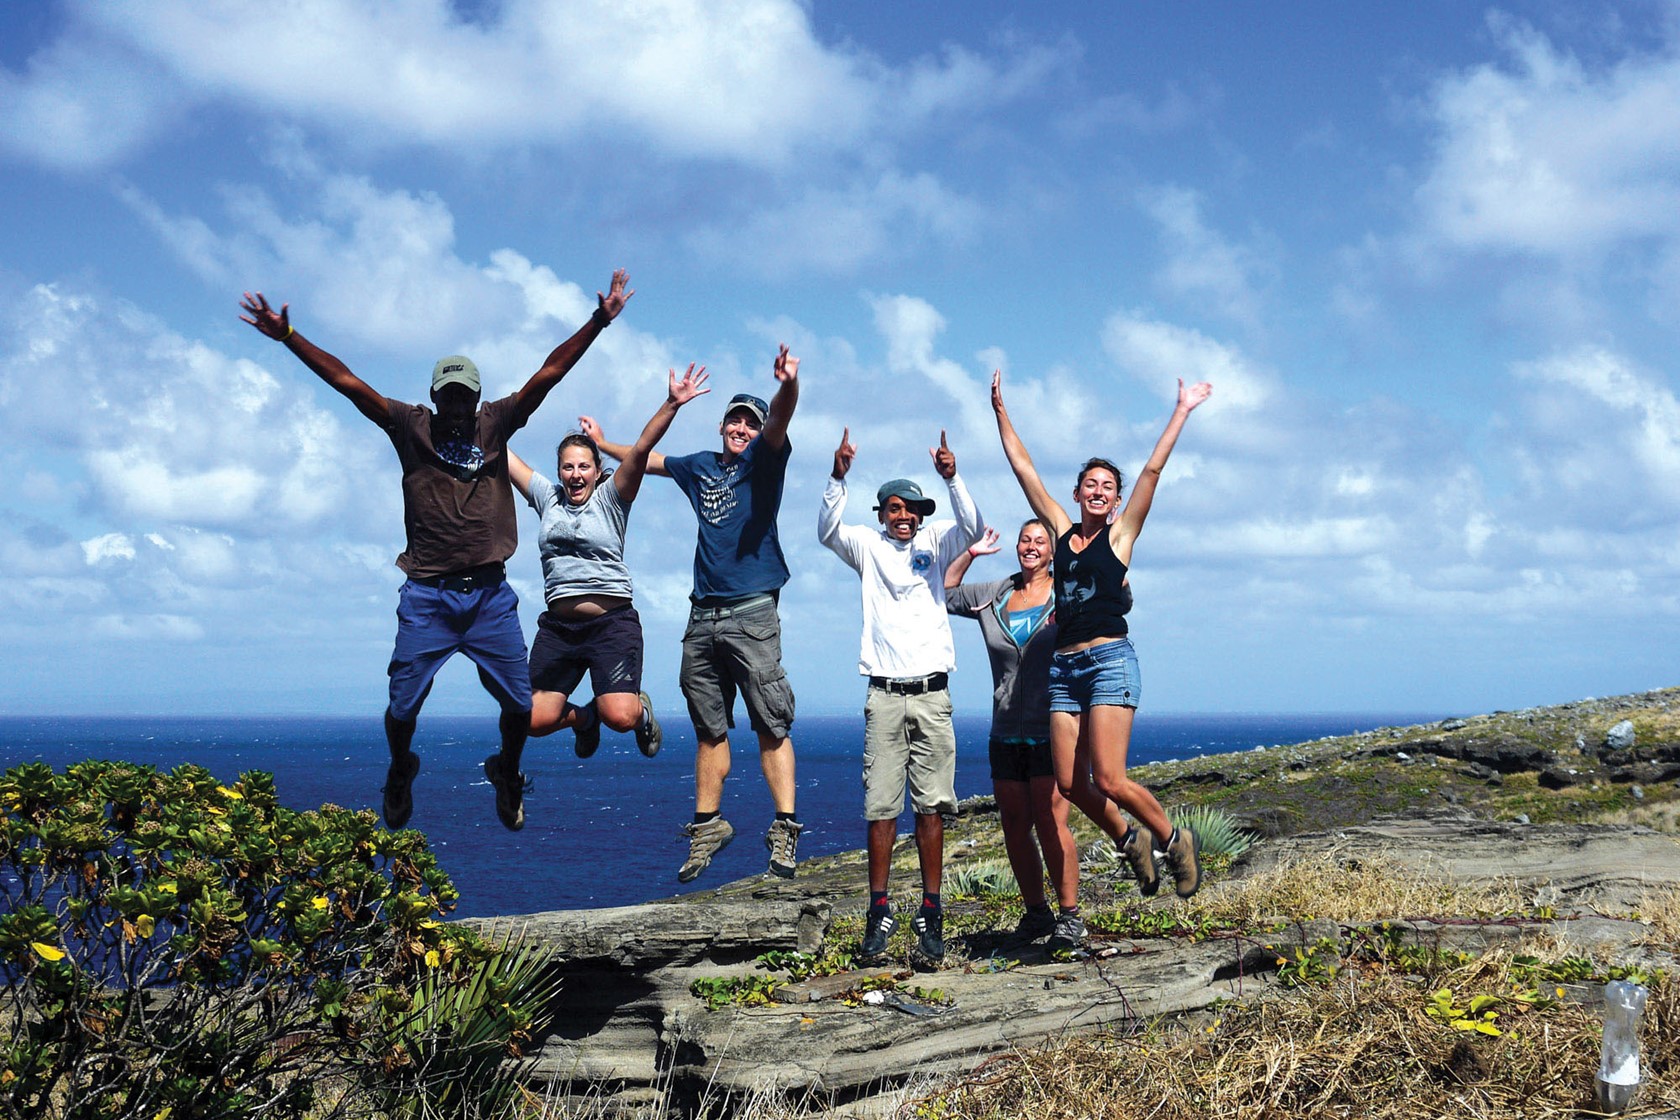 Durrell conservation team in Mauritius jump for joy